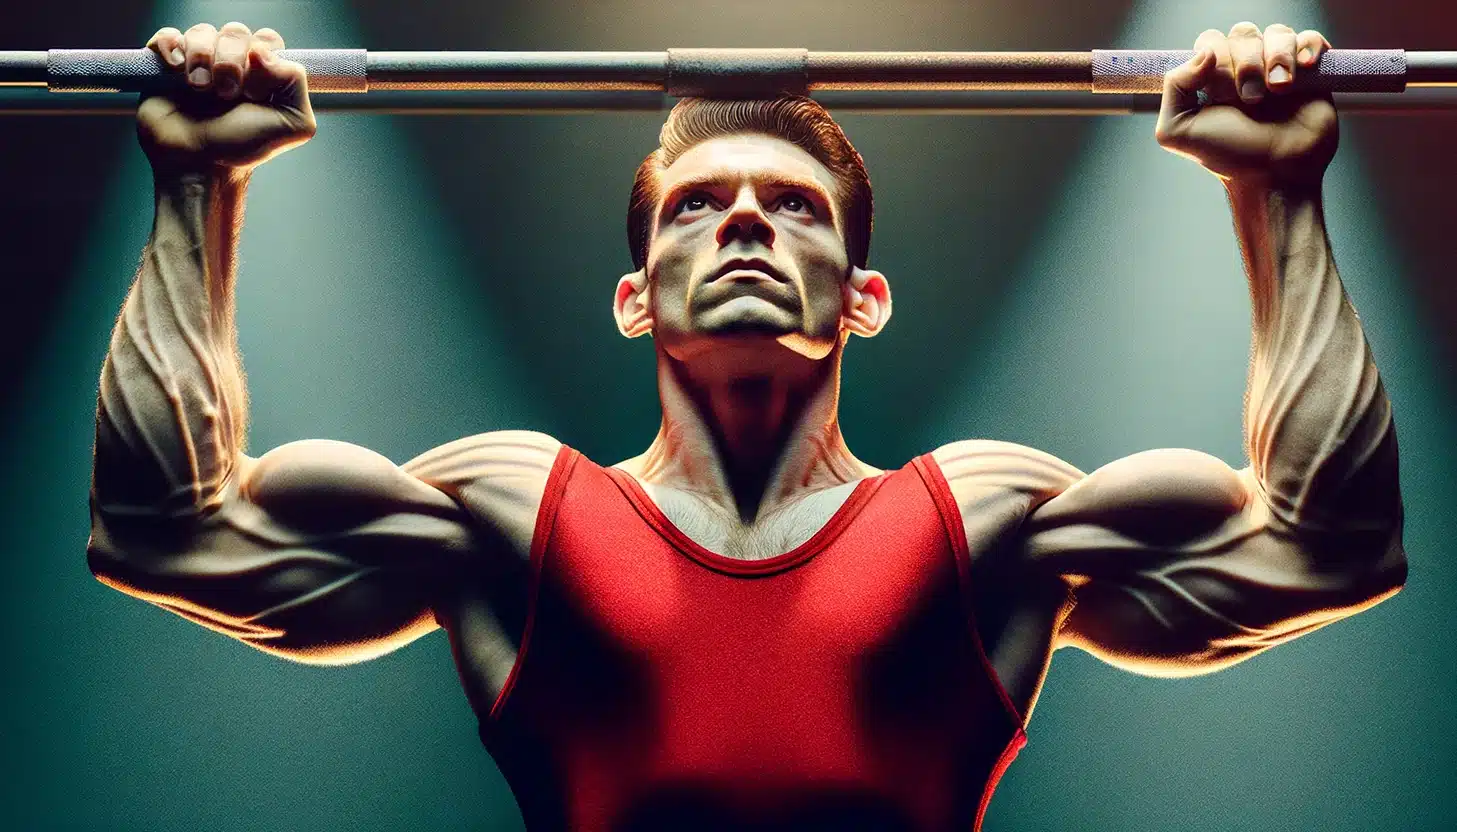 Why Gymnast Biceps Are Impressively Large